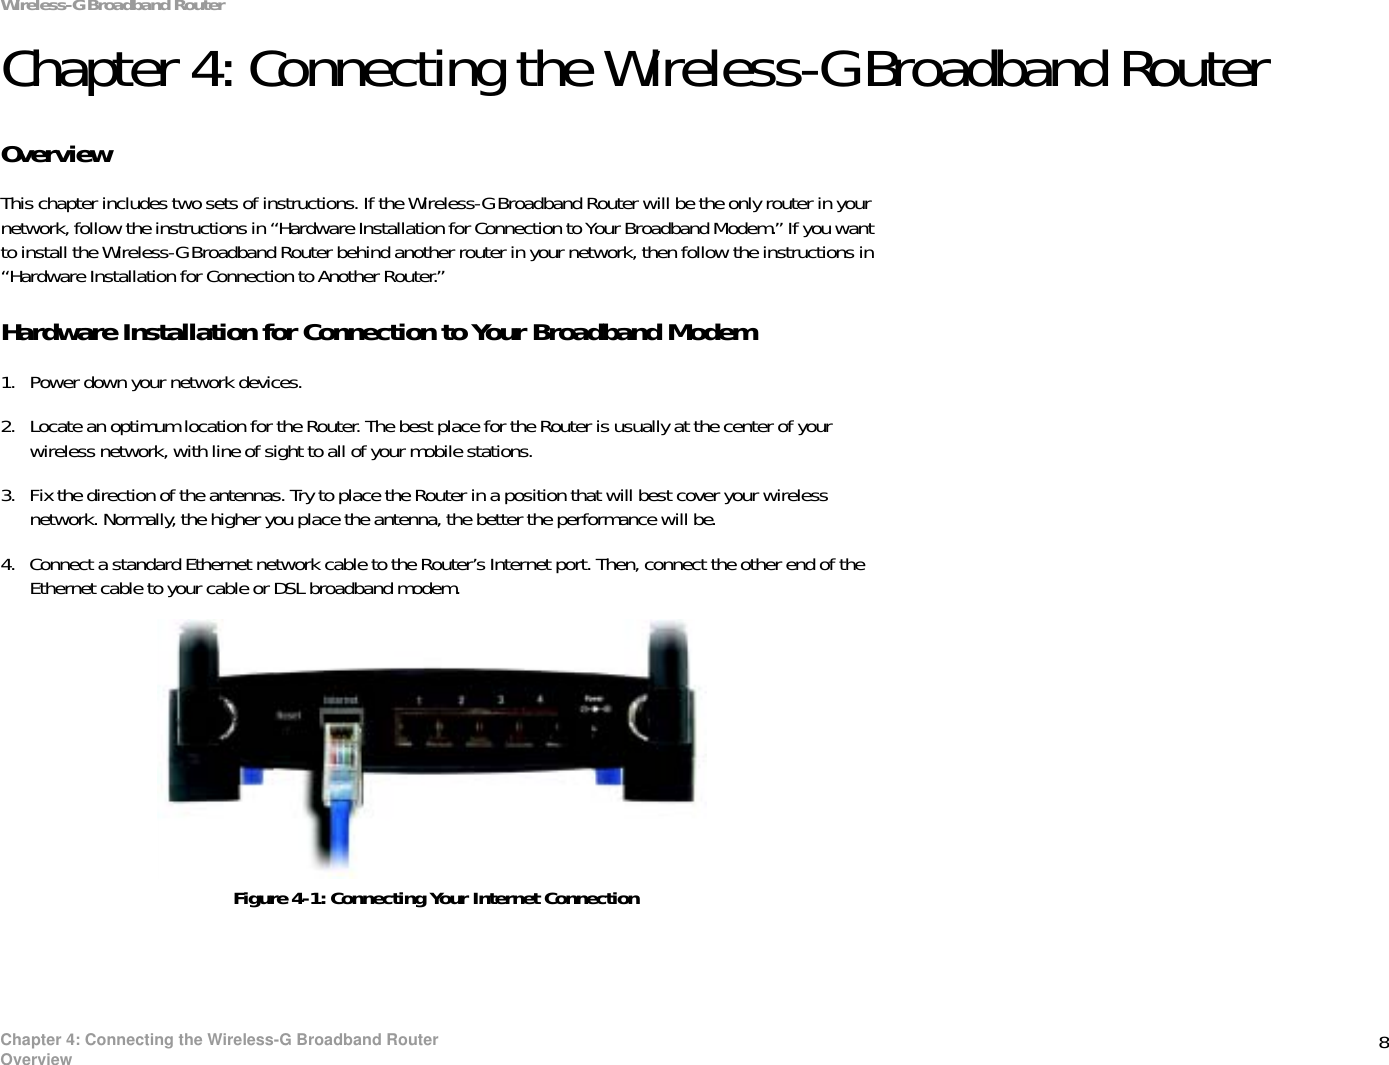 8Chapter 4: Connecting the Wireless-G Broadband RouterOverviewWireless-G Broadband RouterChapter 4: Connecting the Wireless-G Broadband RouterOverviewThis chapter includes two sets of instructions. If the Wireless-G Broadband Router will be the only router in your network, follow the instructions in “Hardware Installation for Connection to Your Broadband Modem.” If you want to install the Wireless-G Broadband Router behind another router in your network, then follow the instructions in “Hardware Installation for Connection to Another Router.”Hardware Installation for Connection to Your Broadband Modem1. Power down your network devices.2. Locate an optimum location for the Router. The best place for the Router is usually at the center of your wireless network, with line of sight to all of your mobile stations.3. Fix the direction of the antennas. Try to place the Router in a position that will best cover your wireless network. Normally, the higher you place the antenna, the better the performance will be.4. Connect a standard Ethernet network cable to the Router’s Internet port. Then, connect the other end of the Ethernet cable to your cable or DSL broadband modem.Figure 4-1: Connecting Your Internet Connection